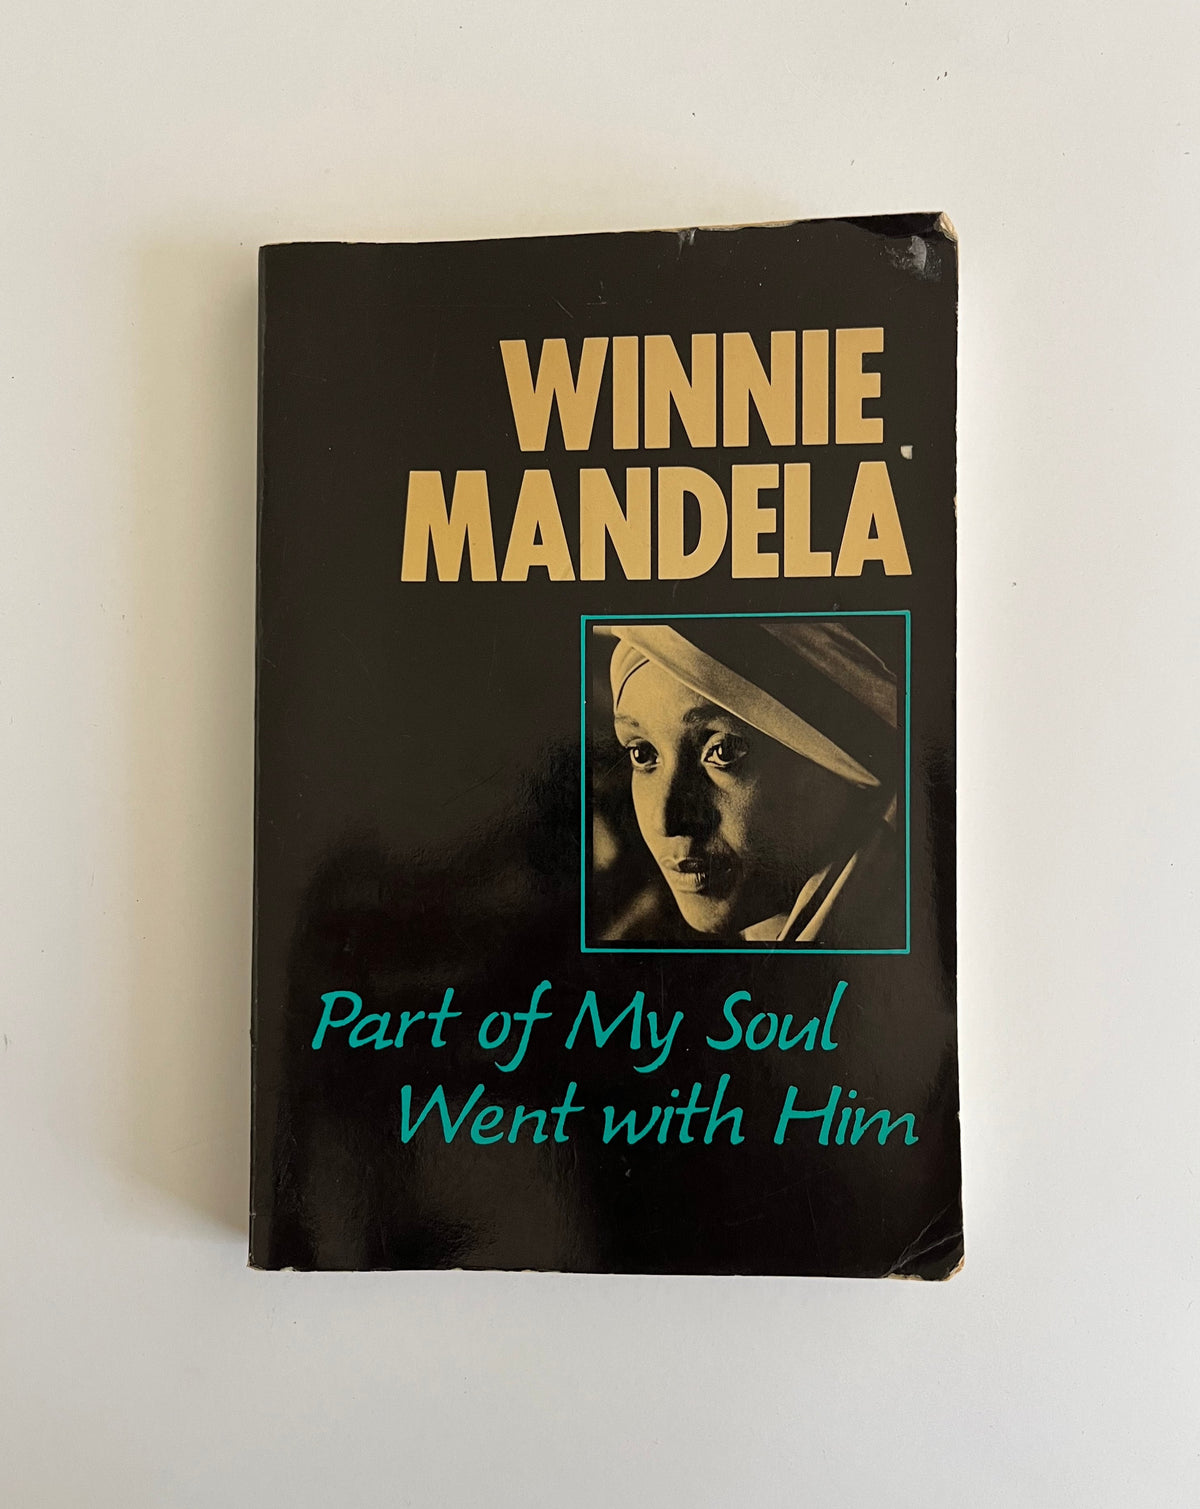 Part of My Soul Went With Him by Winnie Mandela